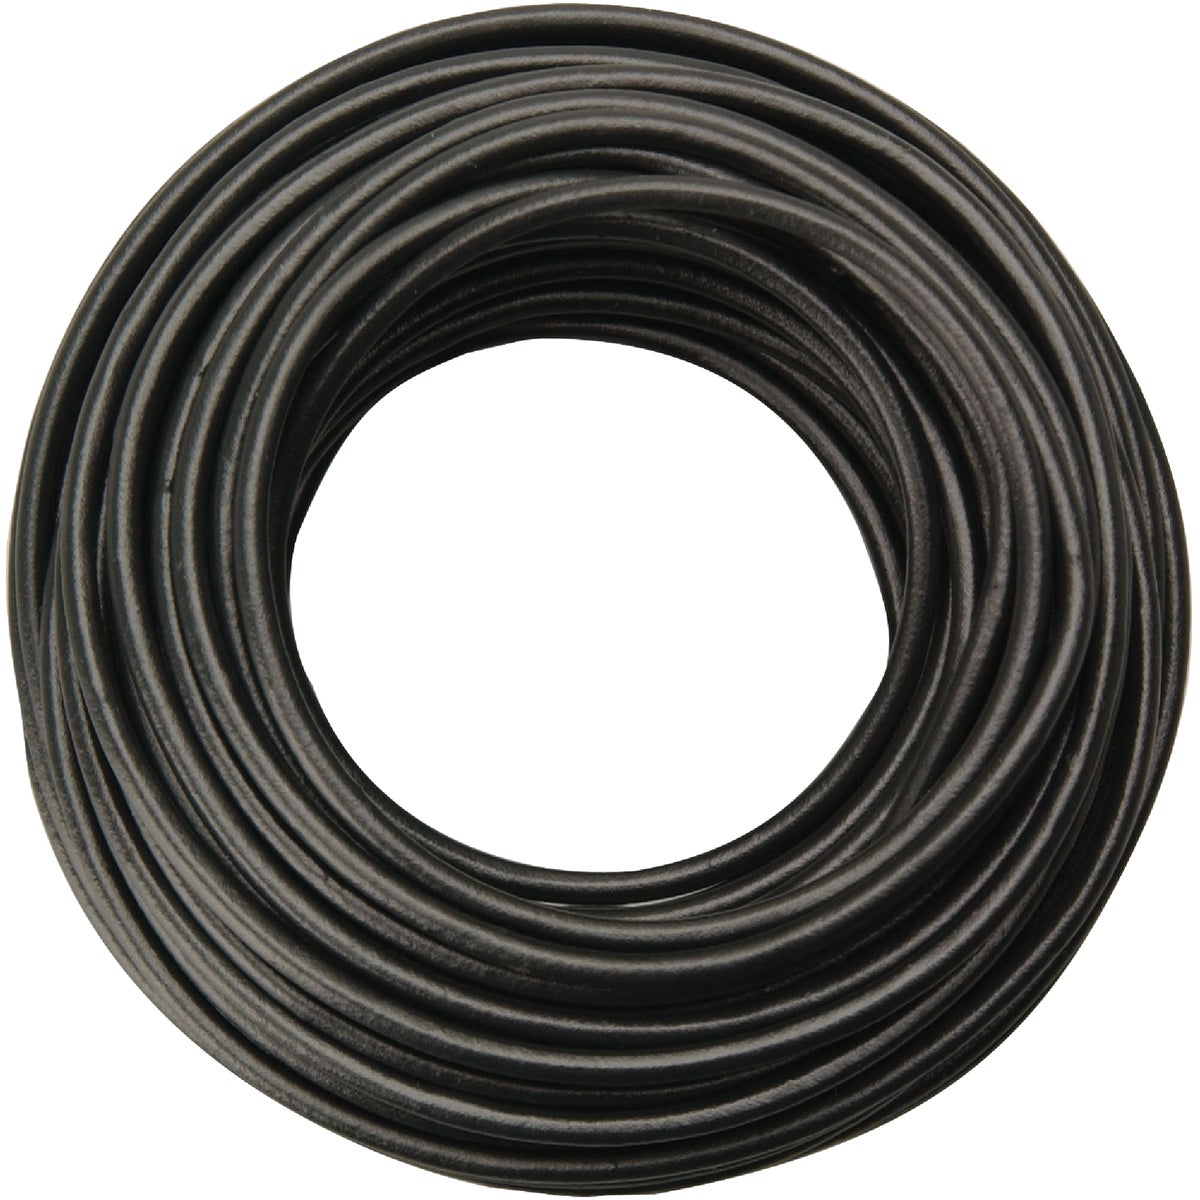 ROAD POWER 55667333 ROAD POWER 33 Ft. 18 Ga. PVC-Coated Primary Wire, Black 55667333